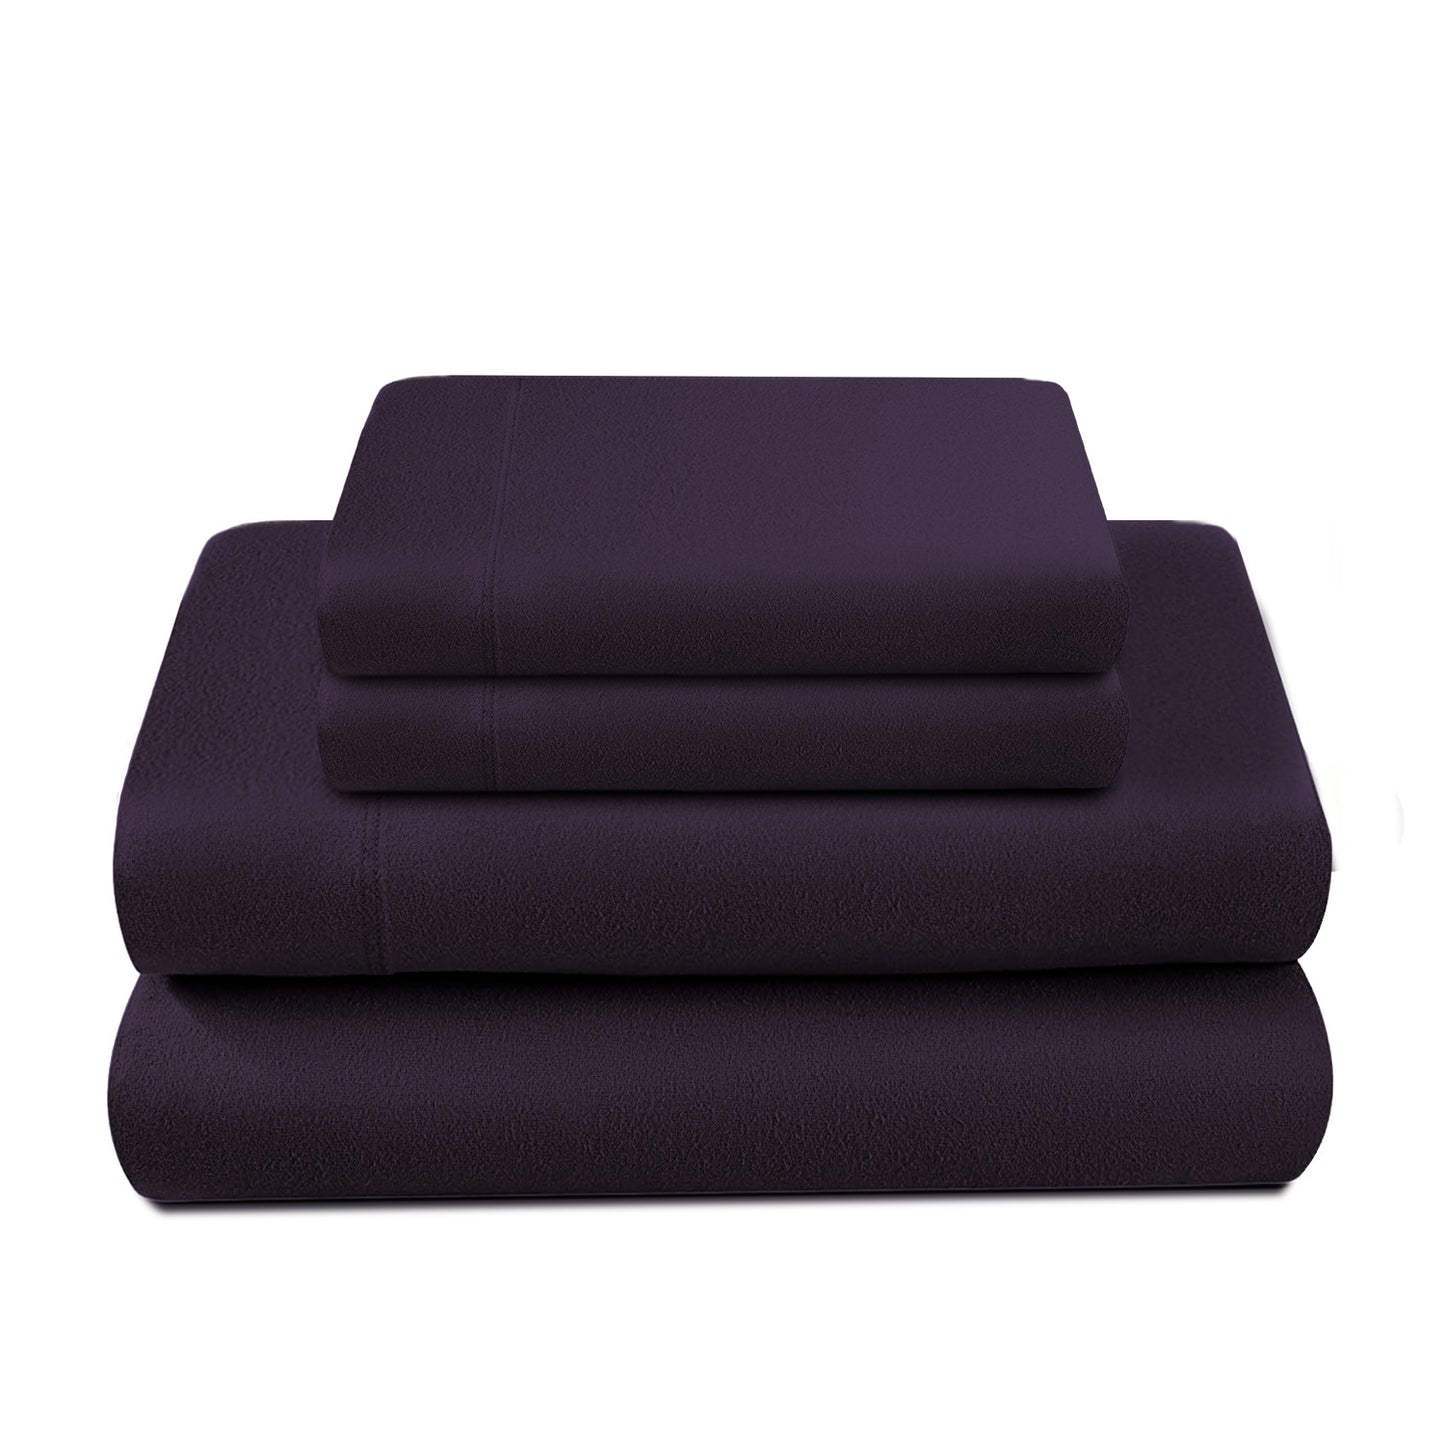 100% Cotton Double Brushed Flannel Sheet Set - 170 GSM Heavyweight, Deep Pockets, Pre-Shrunk & Anti-Pill, All Around Elastic